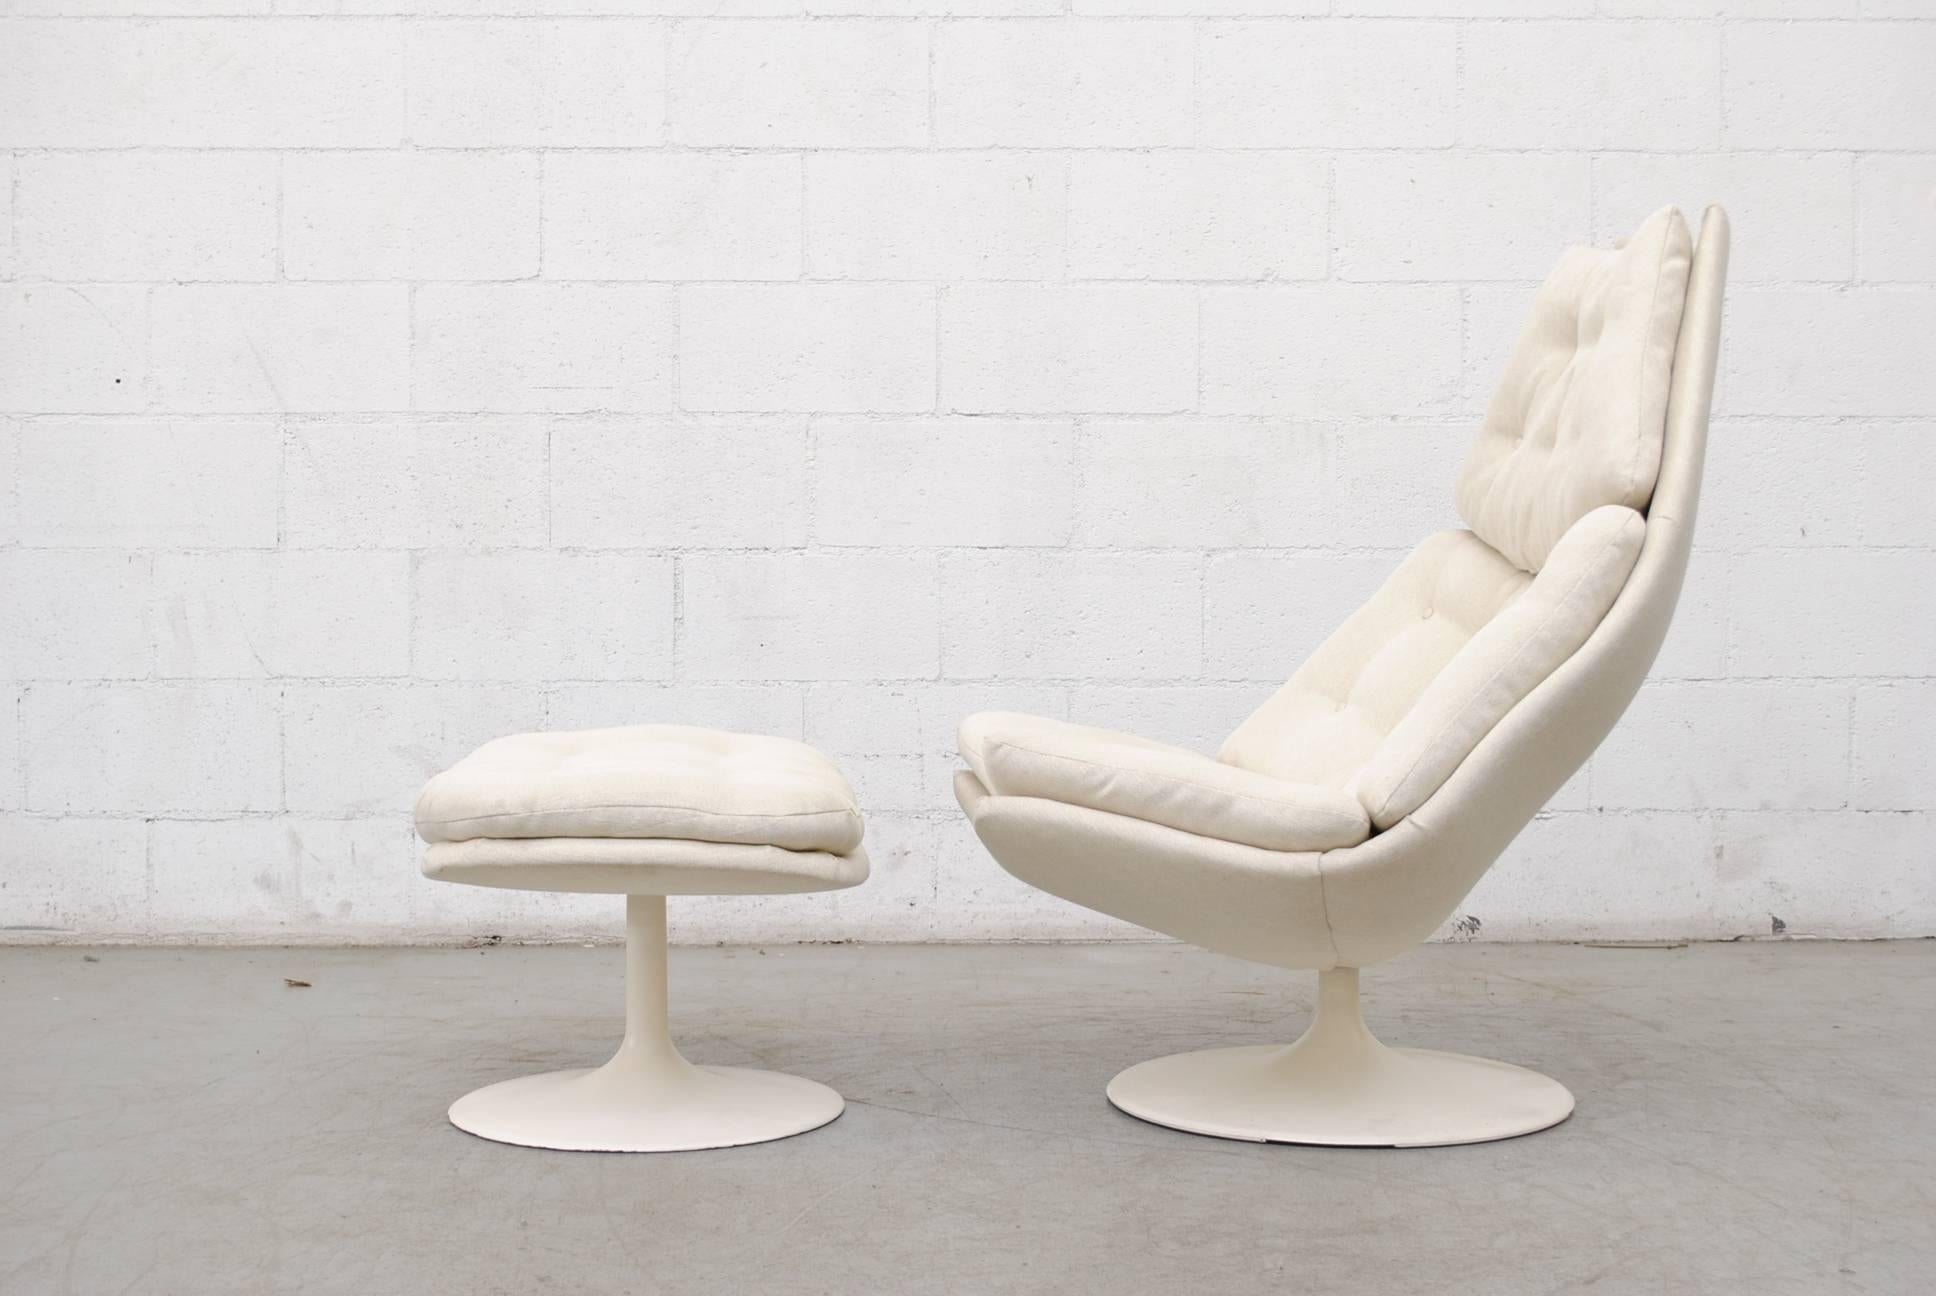 Beautiful white on white Geoffrey Harcourt f588 swivel lounge chair for Artifort with matching ottoman. White pedestal base. Newly upholstered in bone white fabric. Bases are in good original condition. Set price.